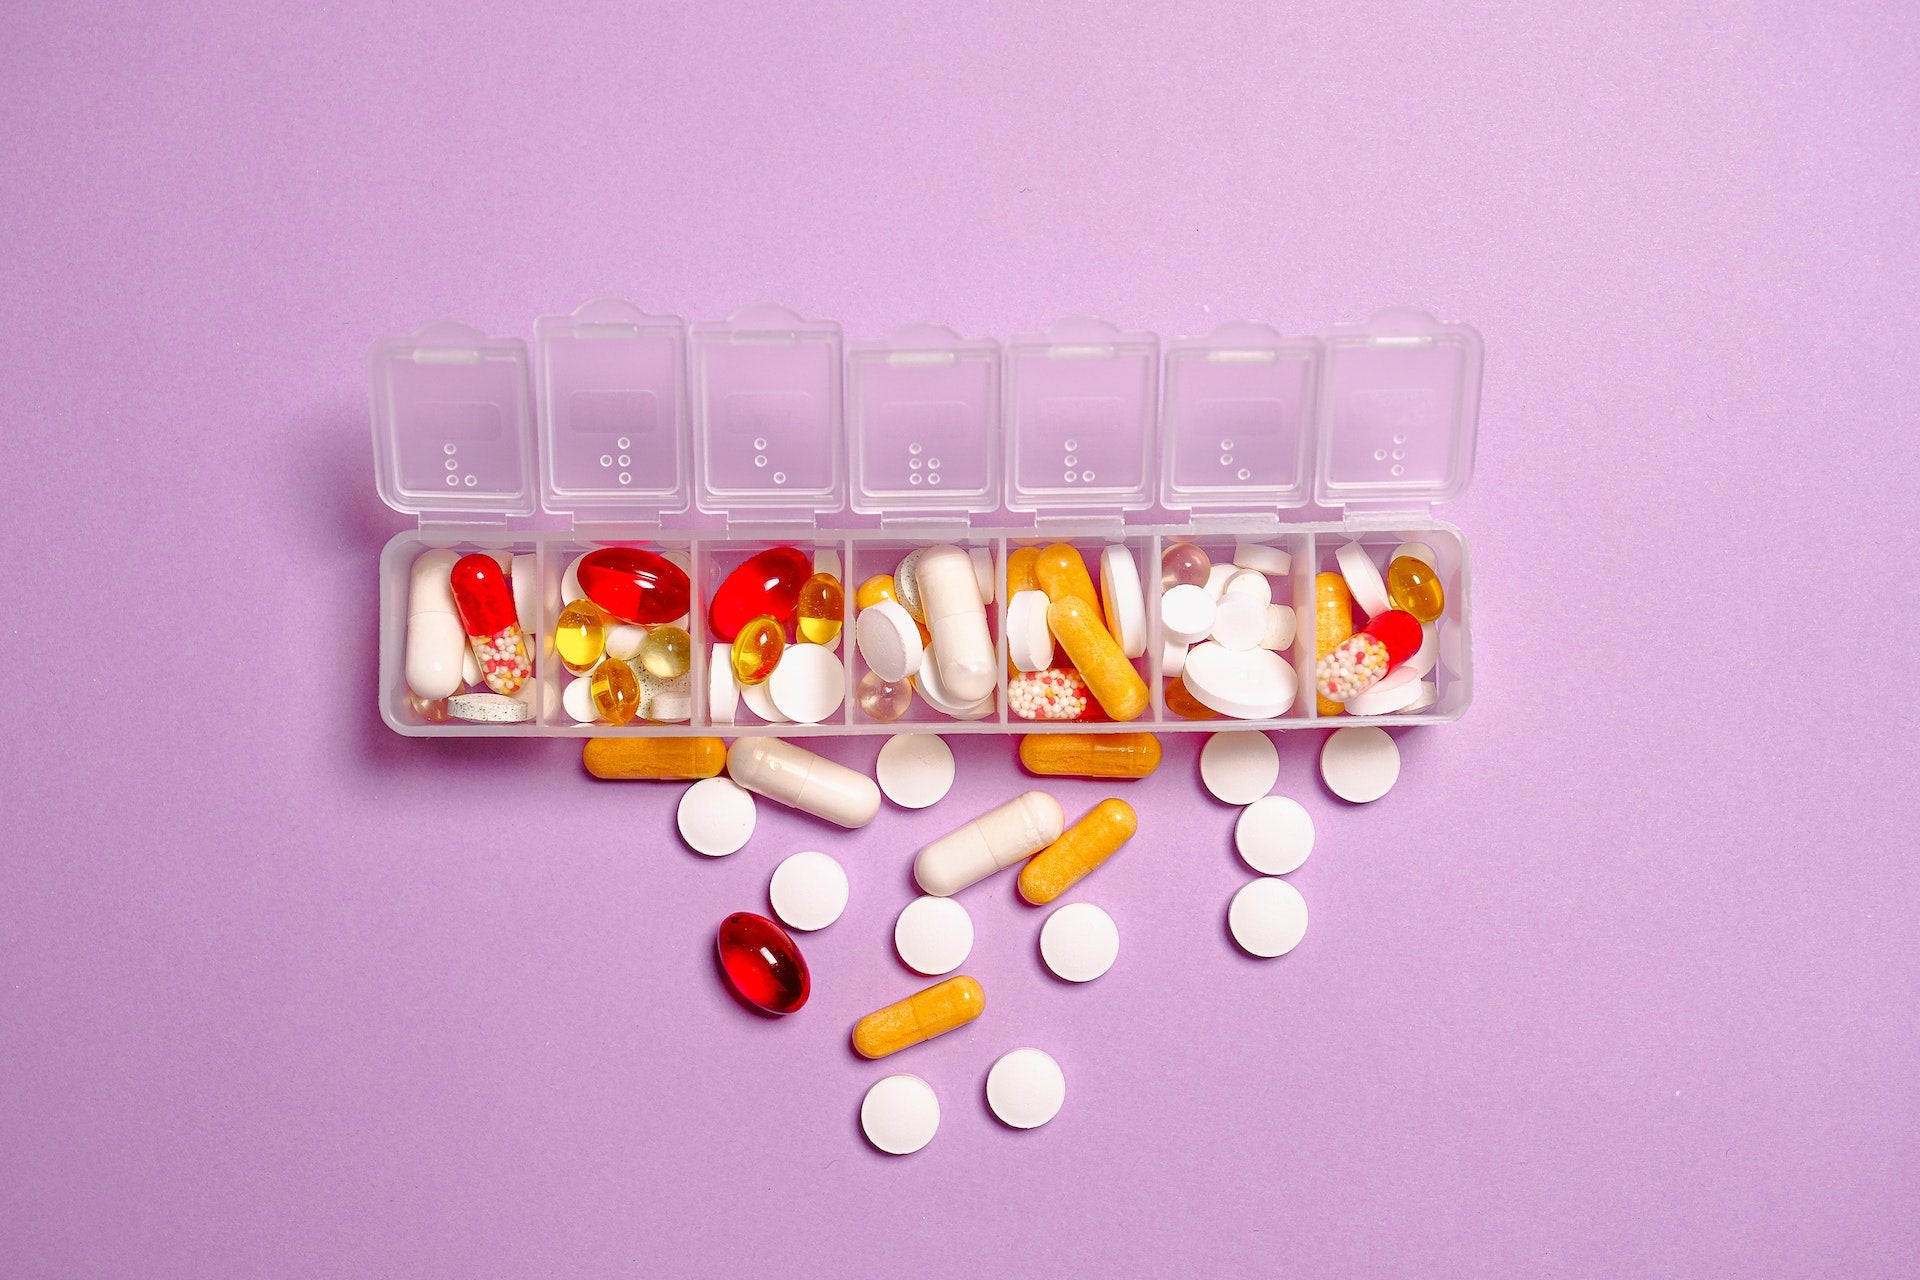 Why Do We *Still* Know So Little About Our Body On The Pill?